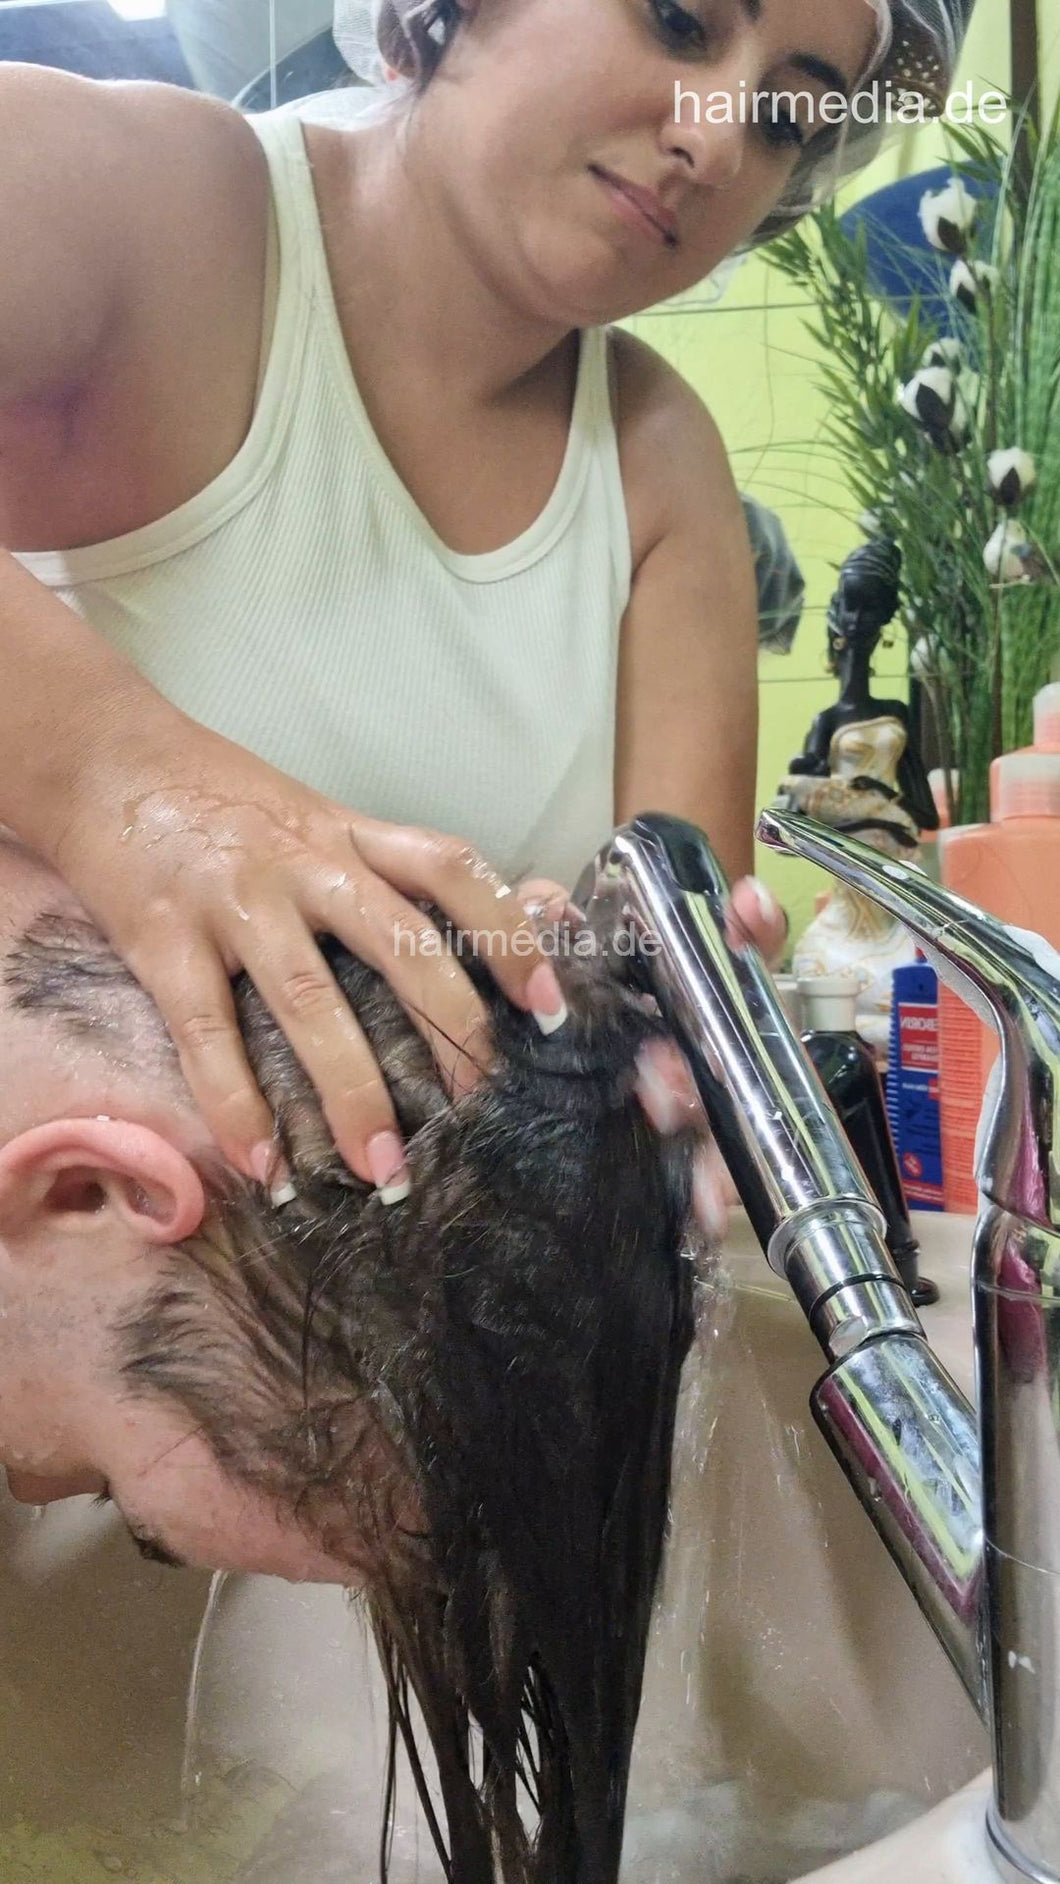 1227 Lars by LuisaB 2 forward  shampooing hairwash by barberette in rollers - vertical video